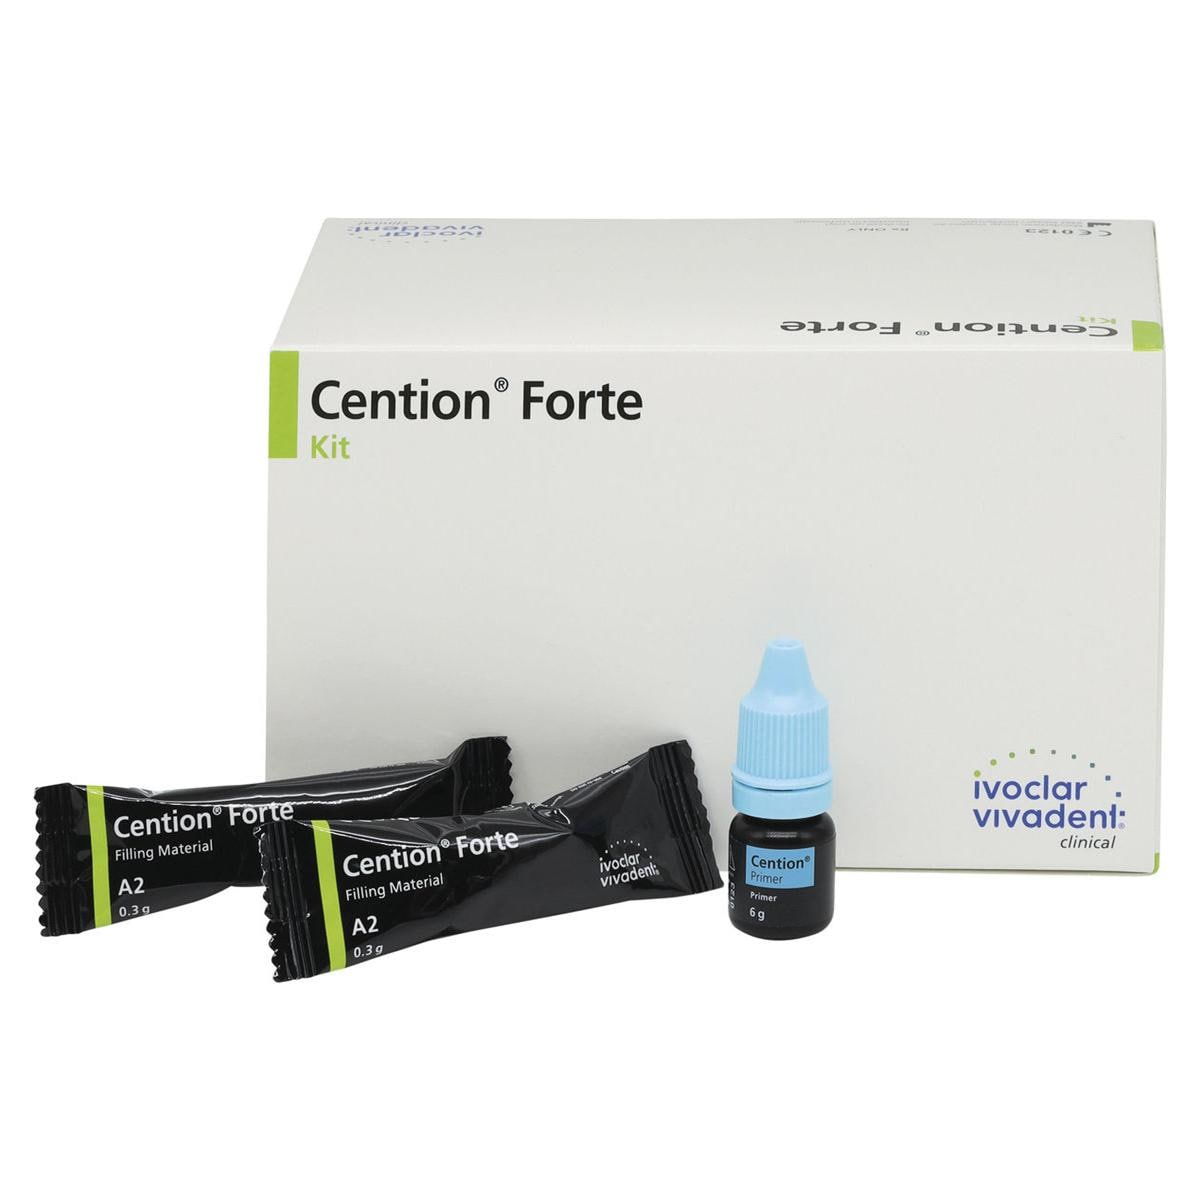 Cention Forte A2 100x0,3g Refill